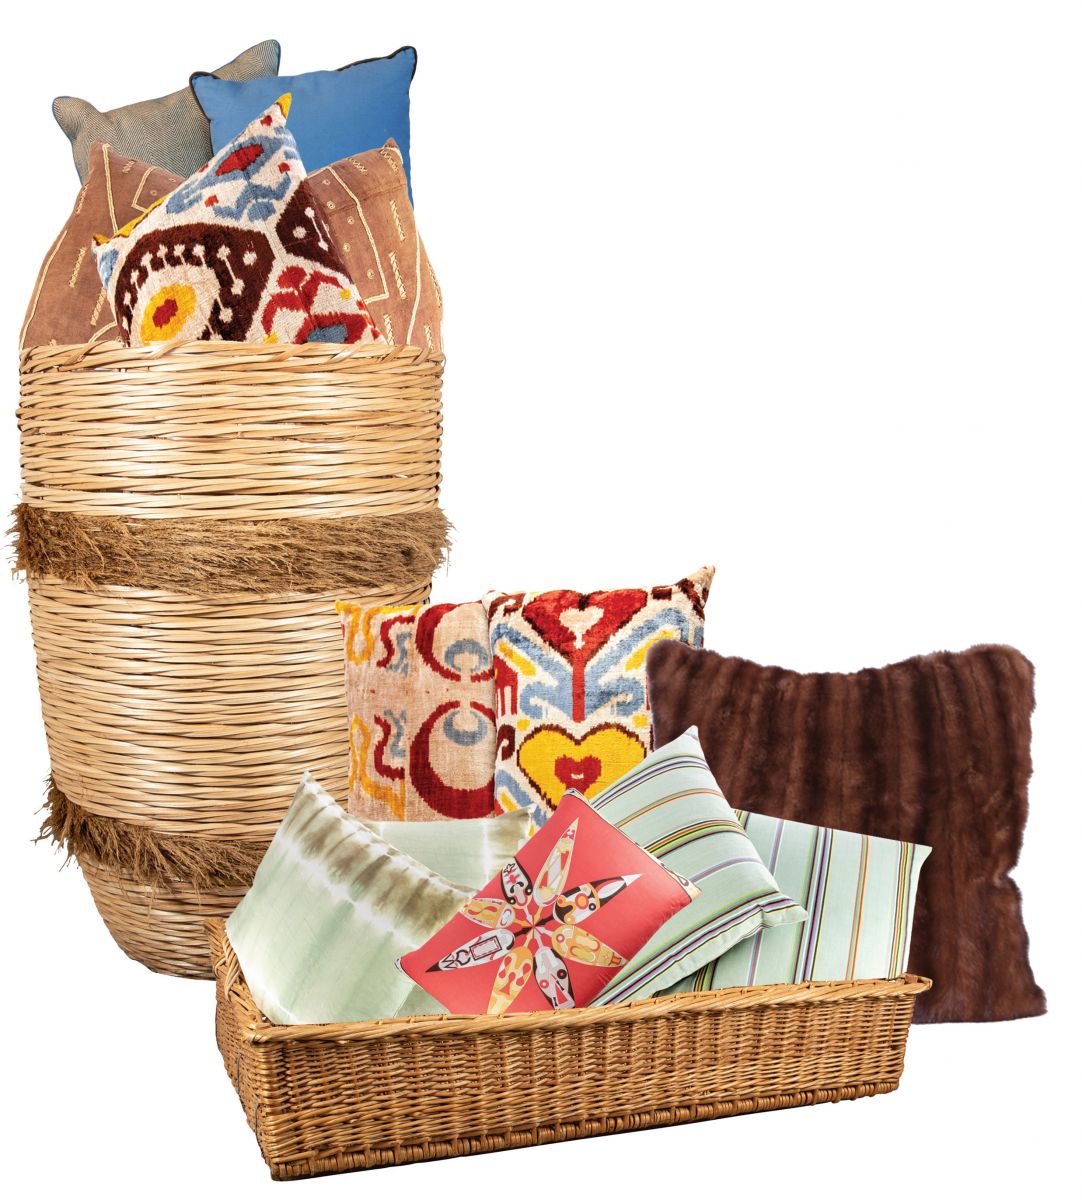 Style a basket with decorative pillows